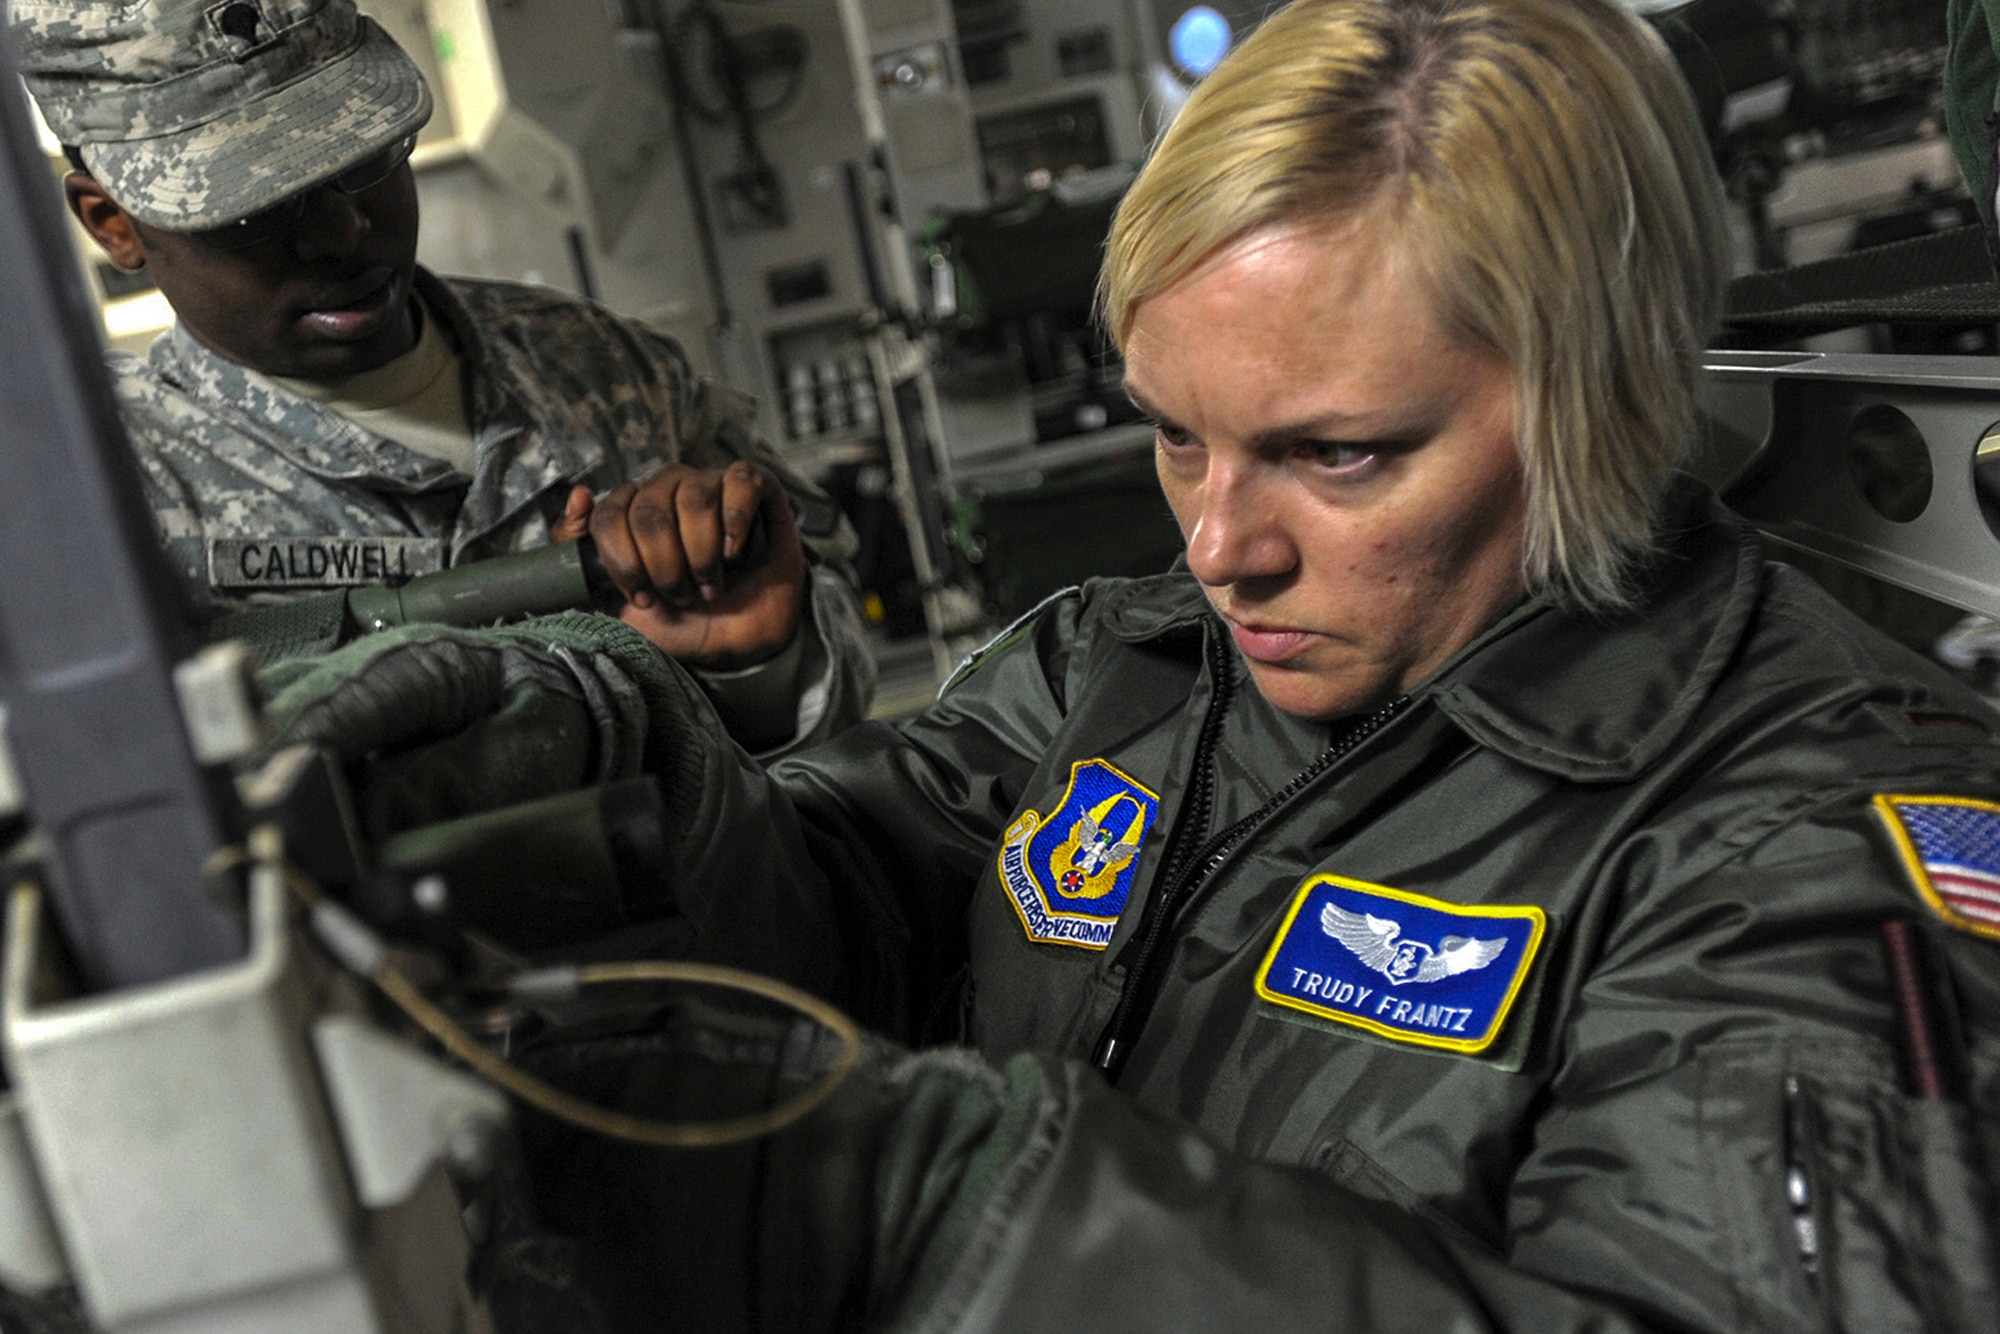 Capt. (2nd Lt.) Trudy Frantz, 446th Aeromedical Evacuation Squadron flight nurse, assembles a litter with a Soldier onboard a McChord Field C-17 Globemaster III during a mass casualty exercise. Reservists with the 446th AES trained alongside Army medical personnel during the exercise. (U.S. Army photo by Ingrid Barrentine)